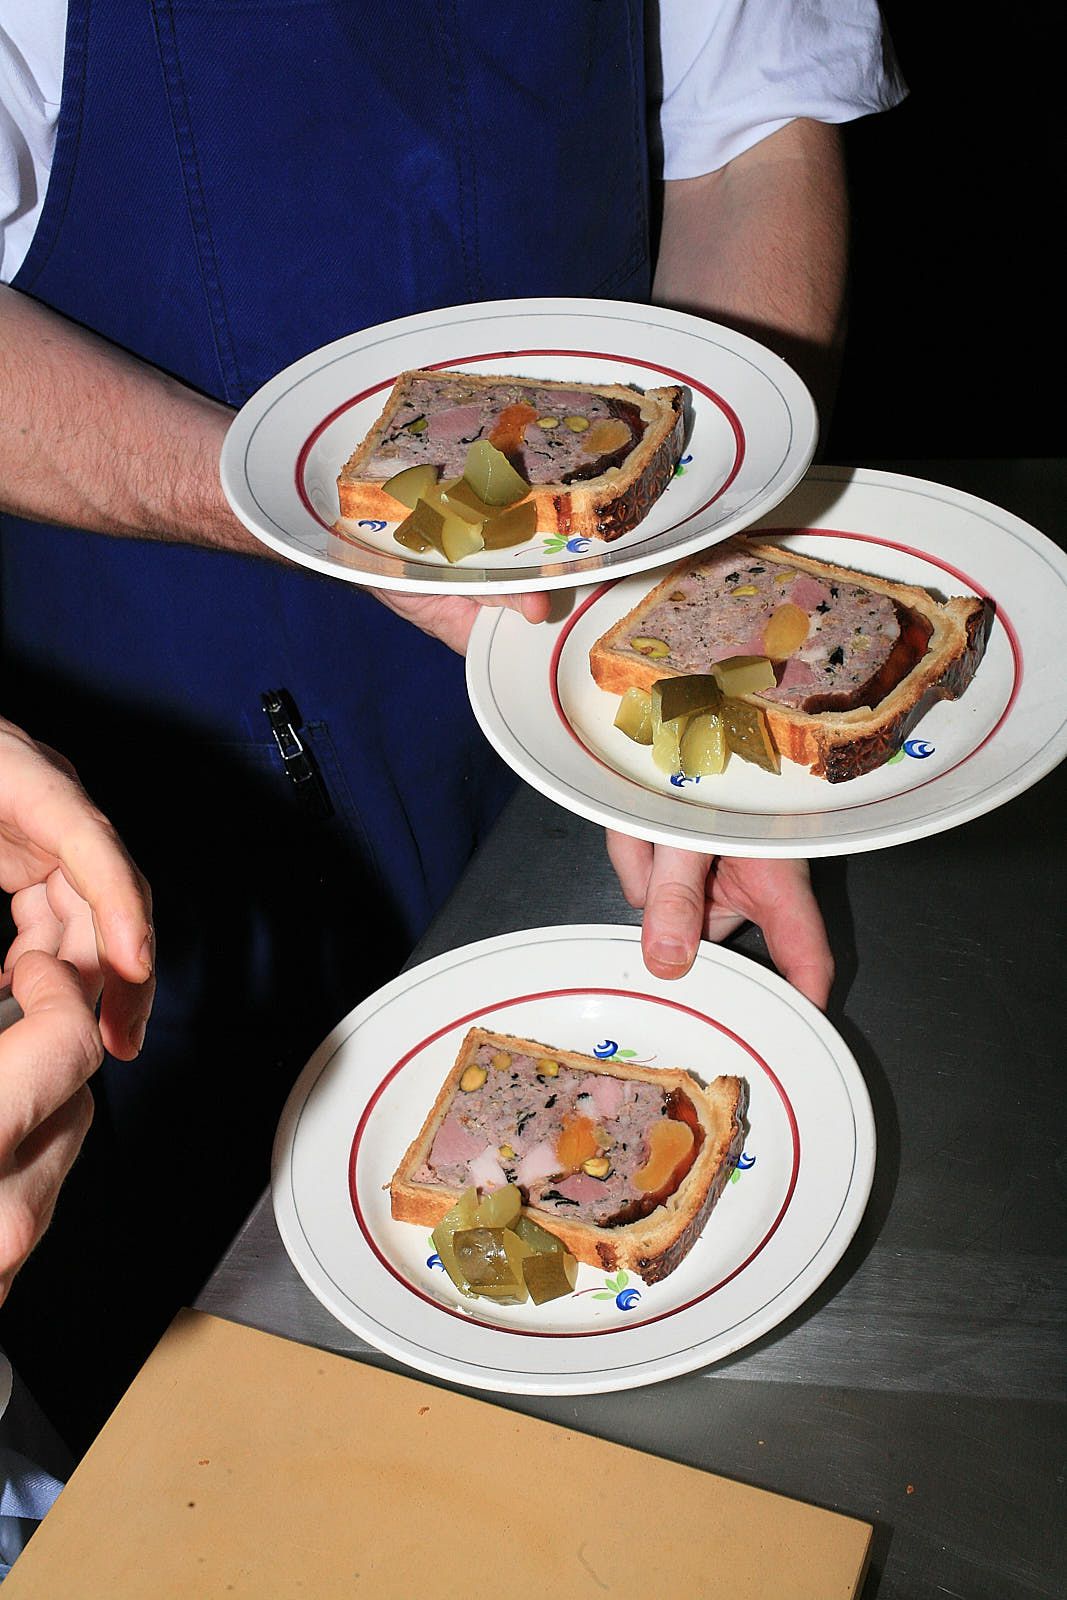 Three plates of paté en croute being carried at once.